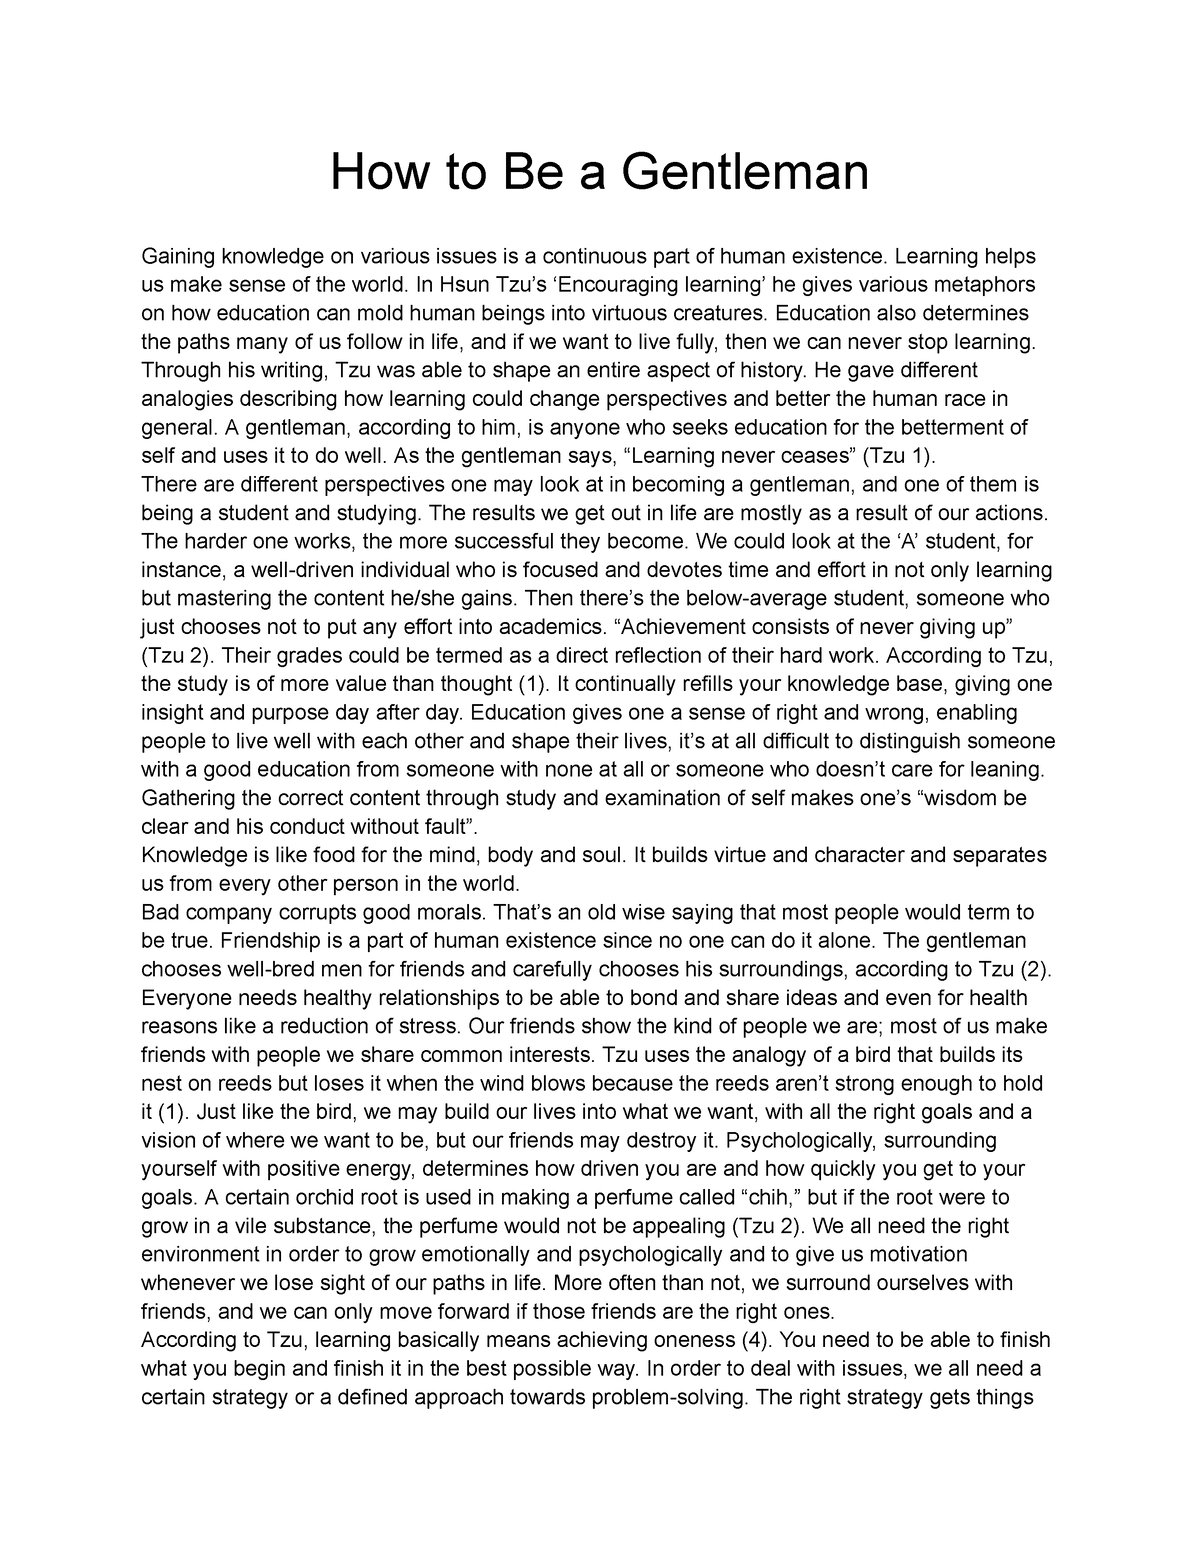 essay on disadvantages of being a gentleman